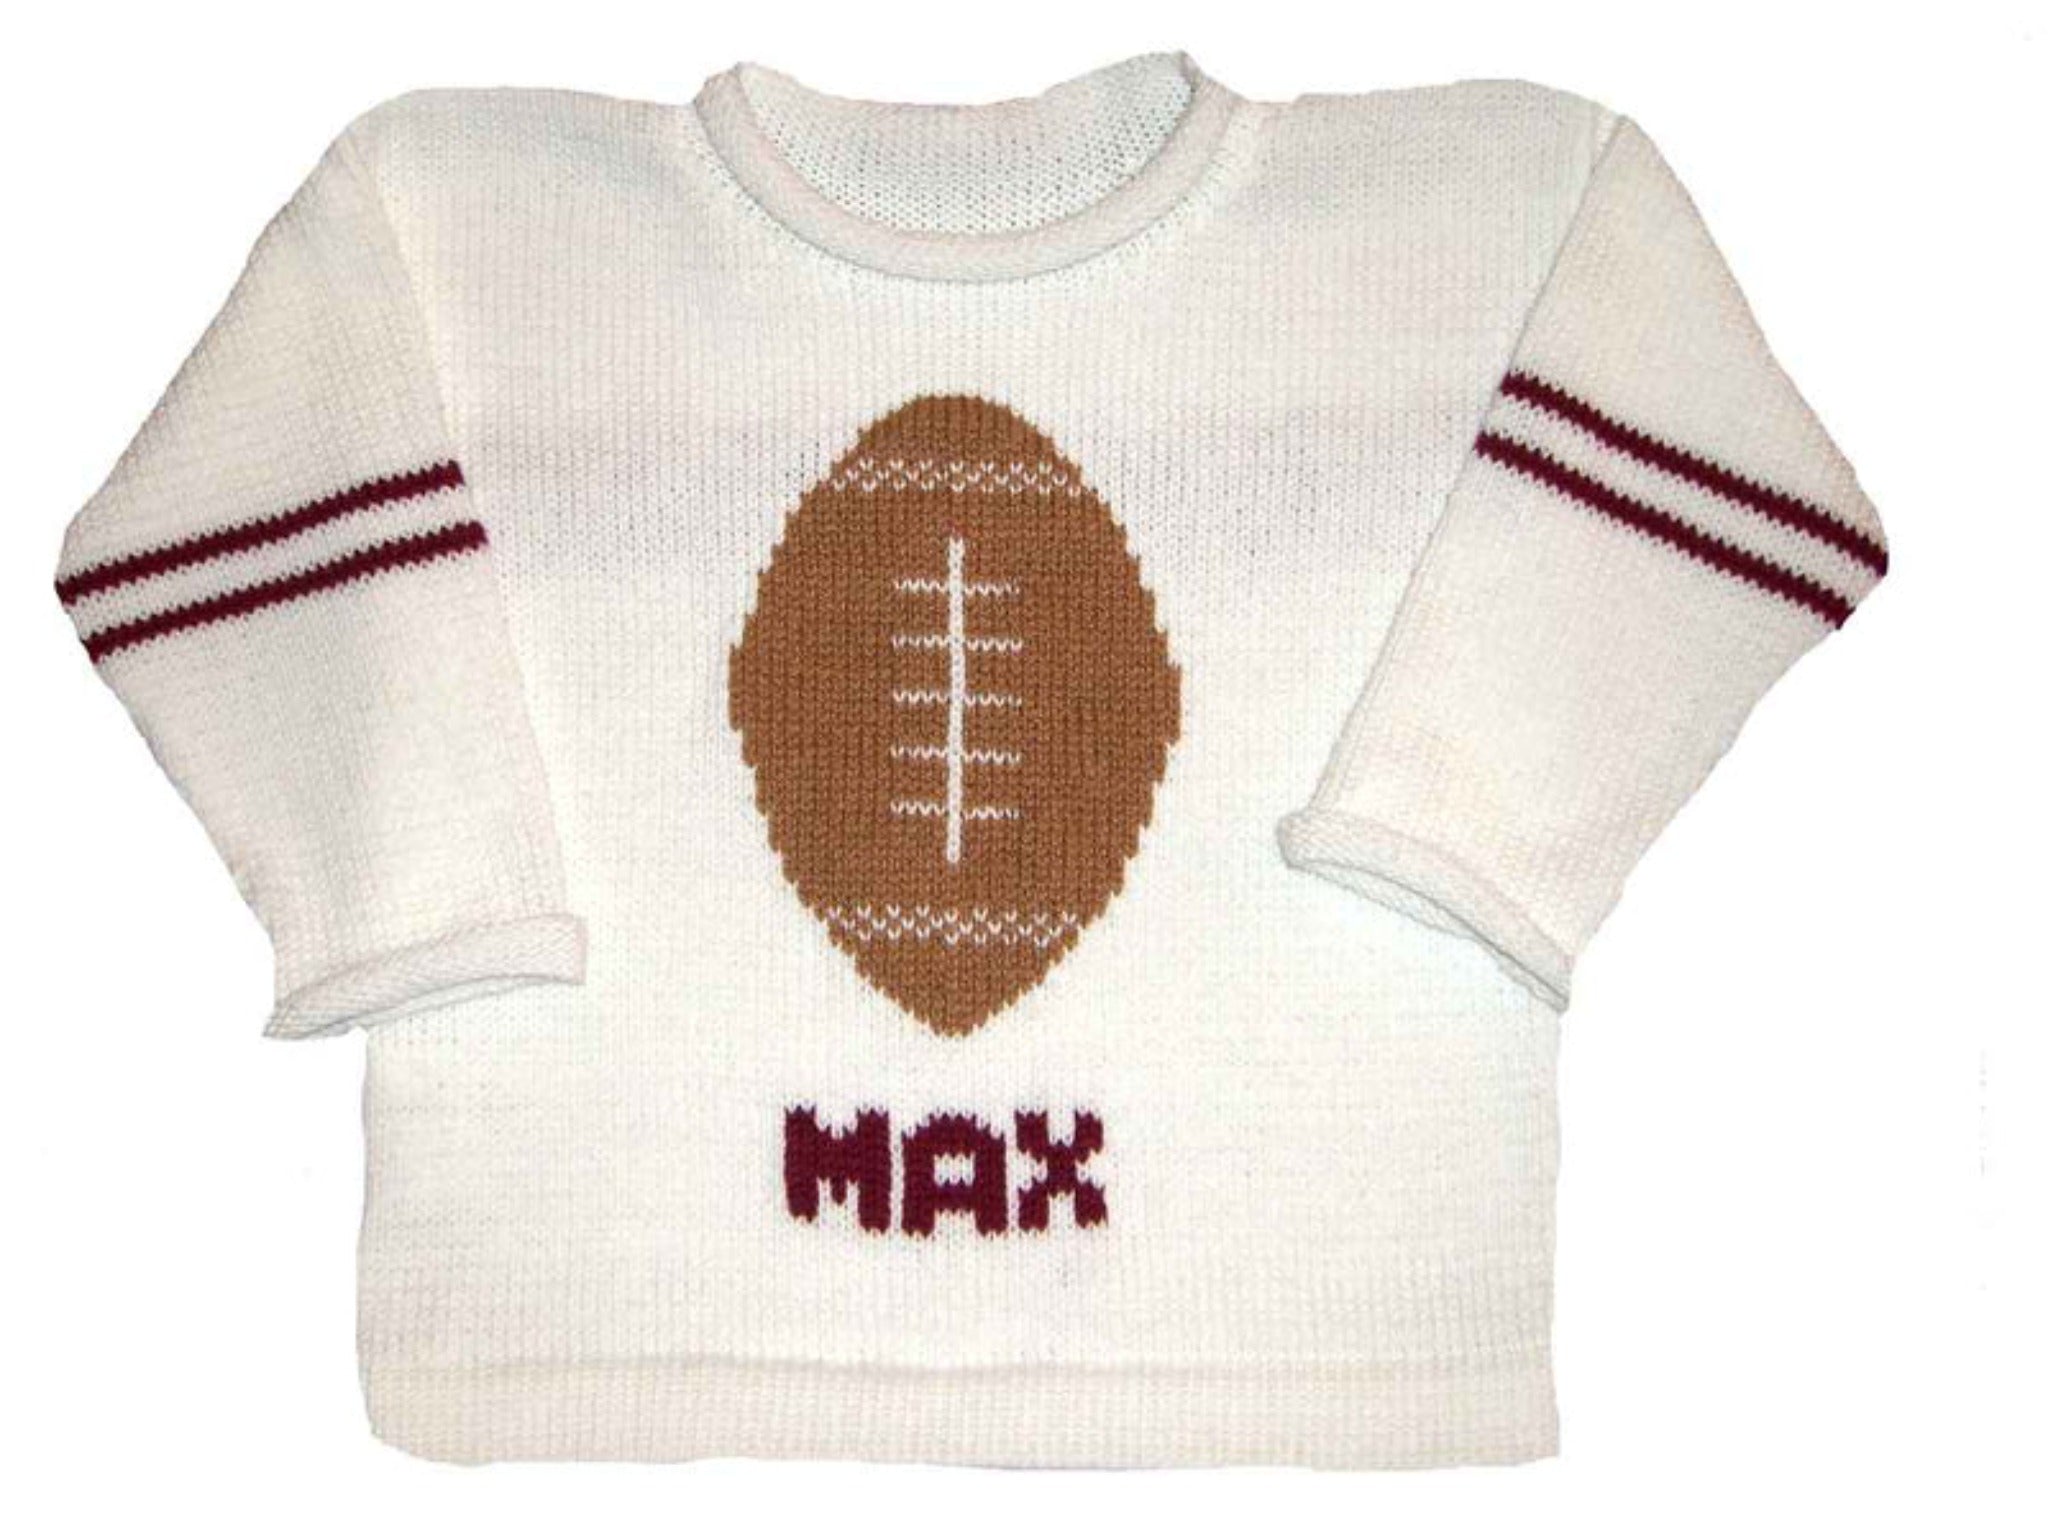 Personalized Football Jersey for Children - Custom Knits for Baby